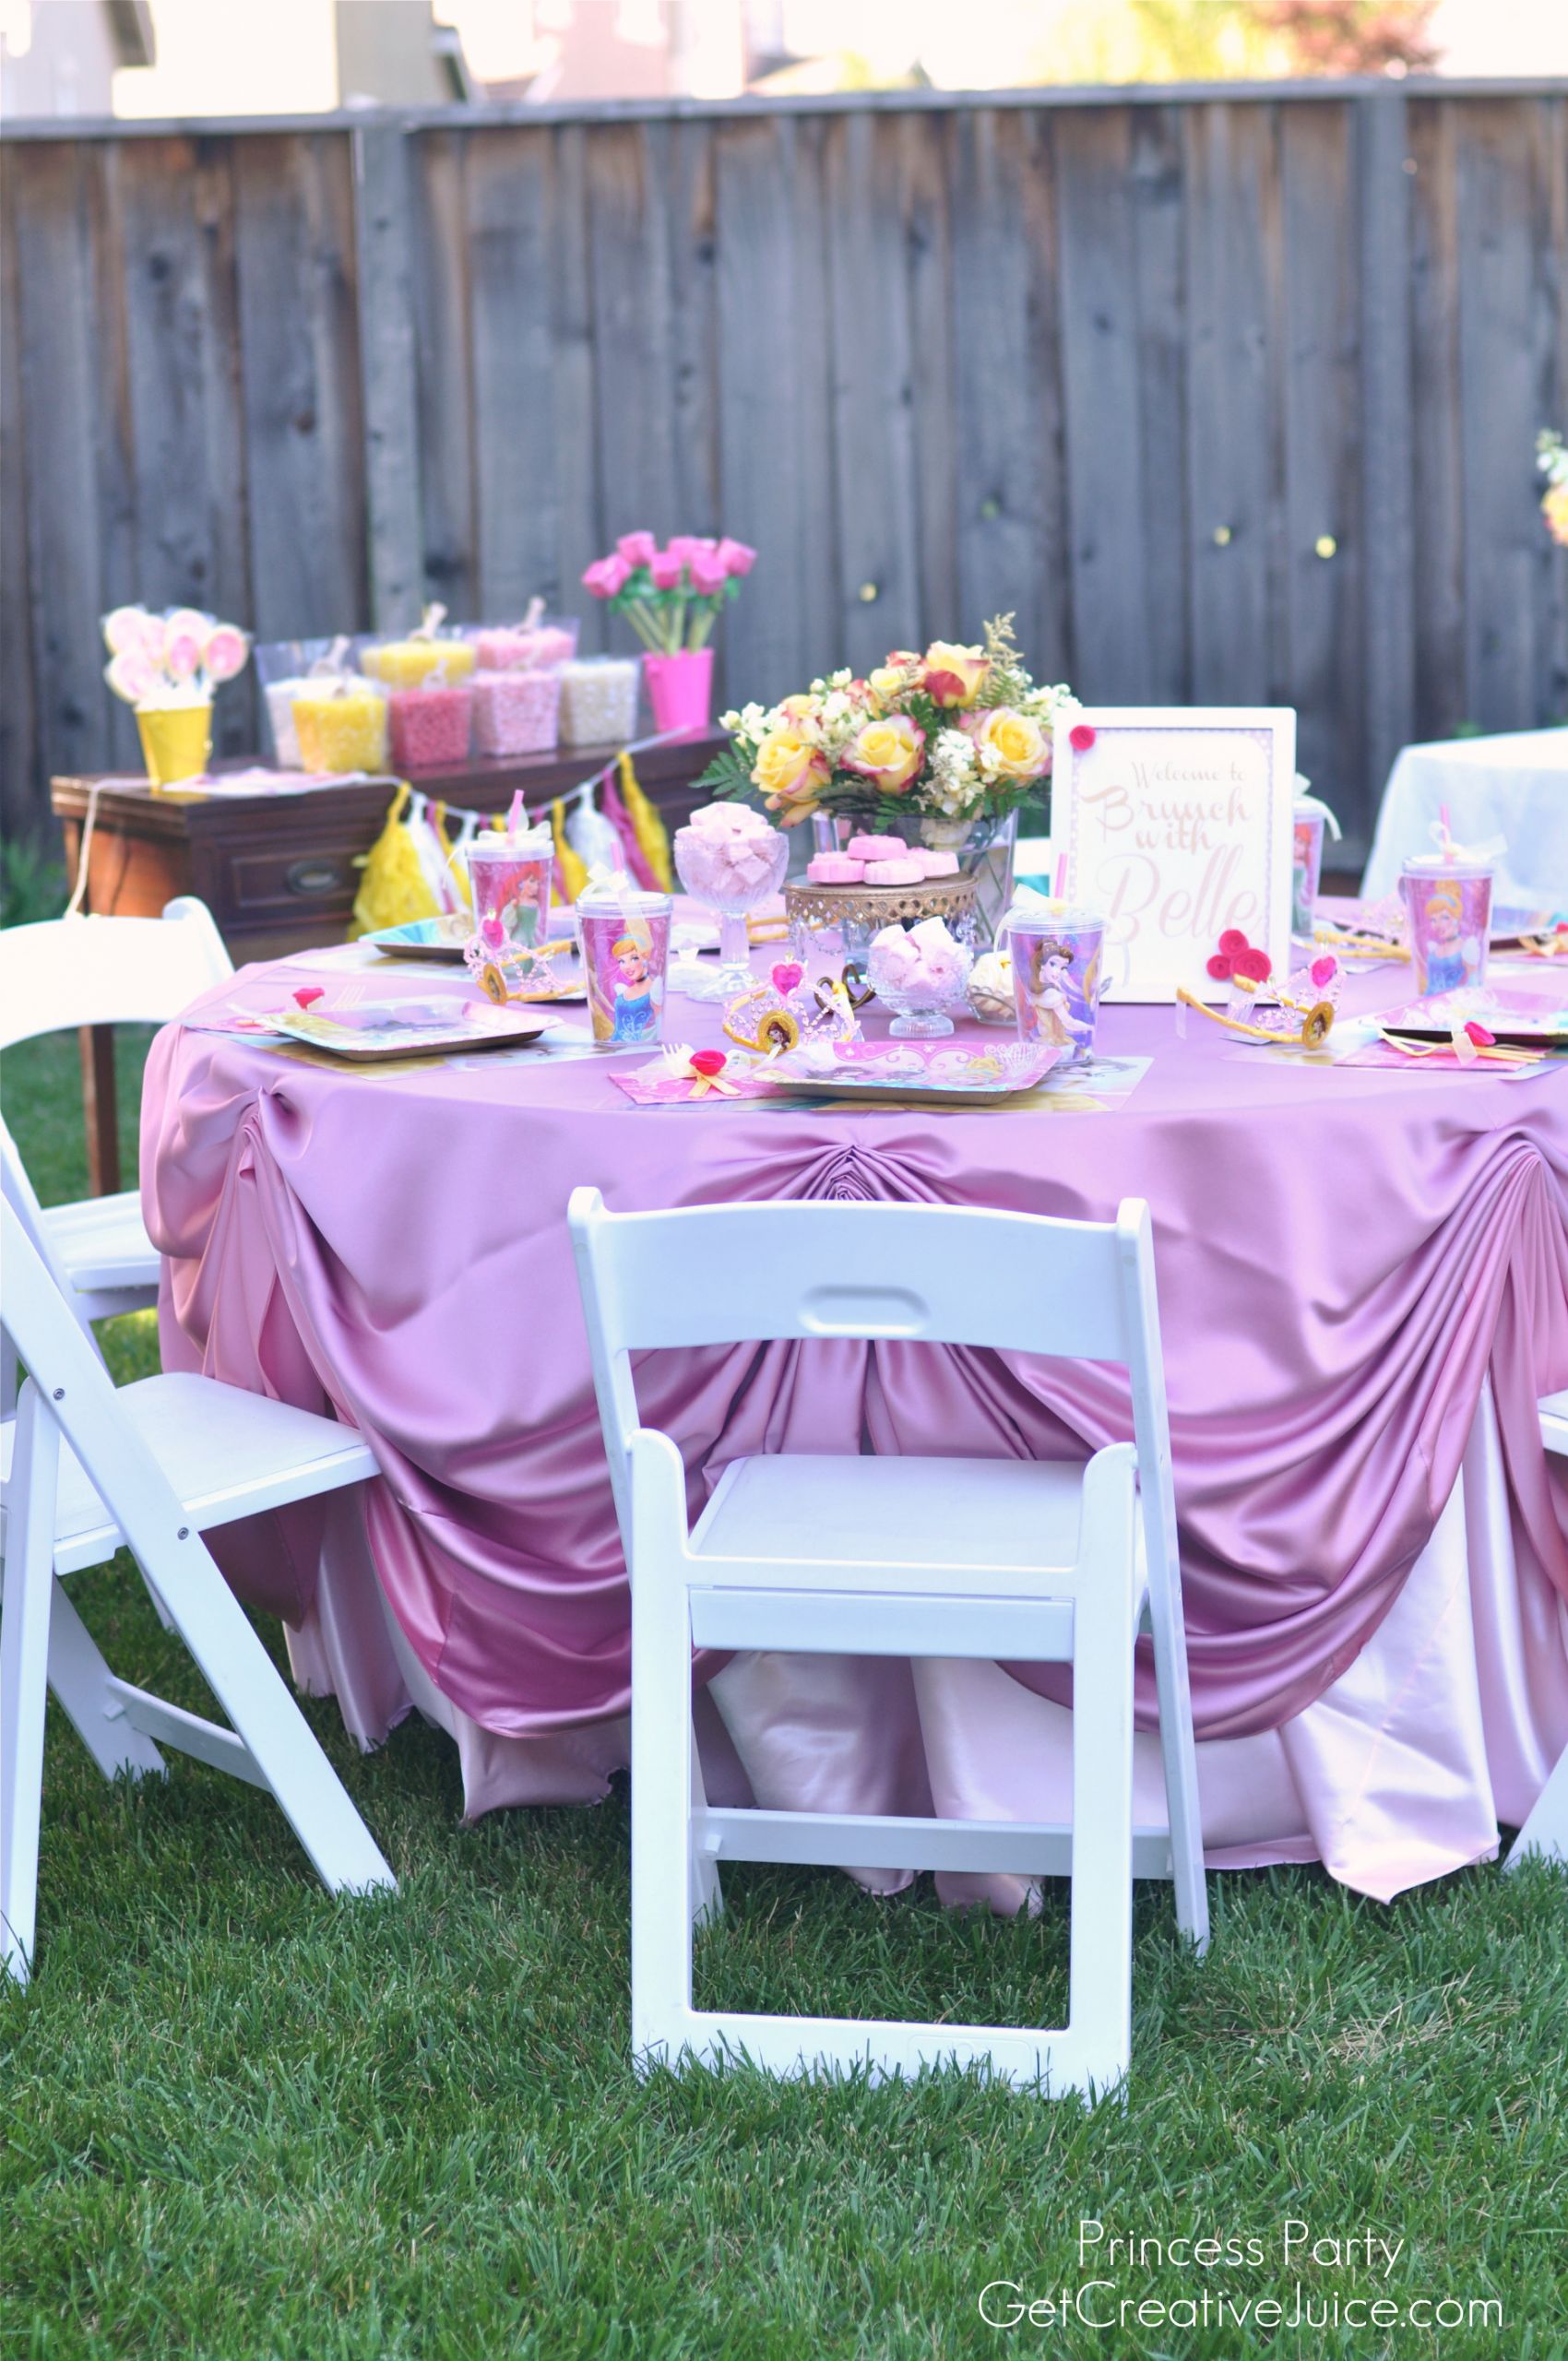 Birthday Party Table Decorations
 Disney Princess Party with Belle Part e Creative Juice